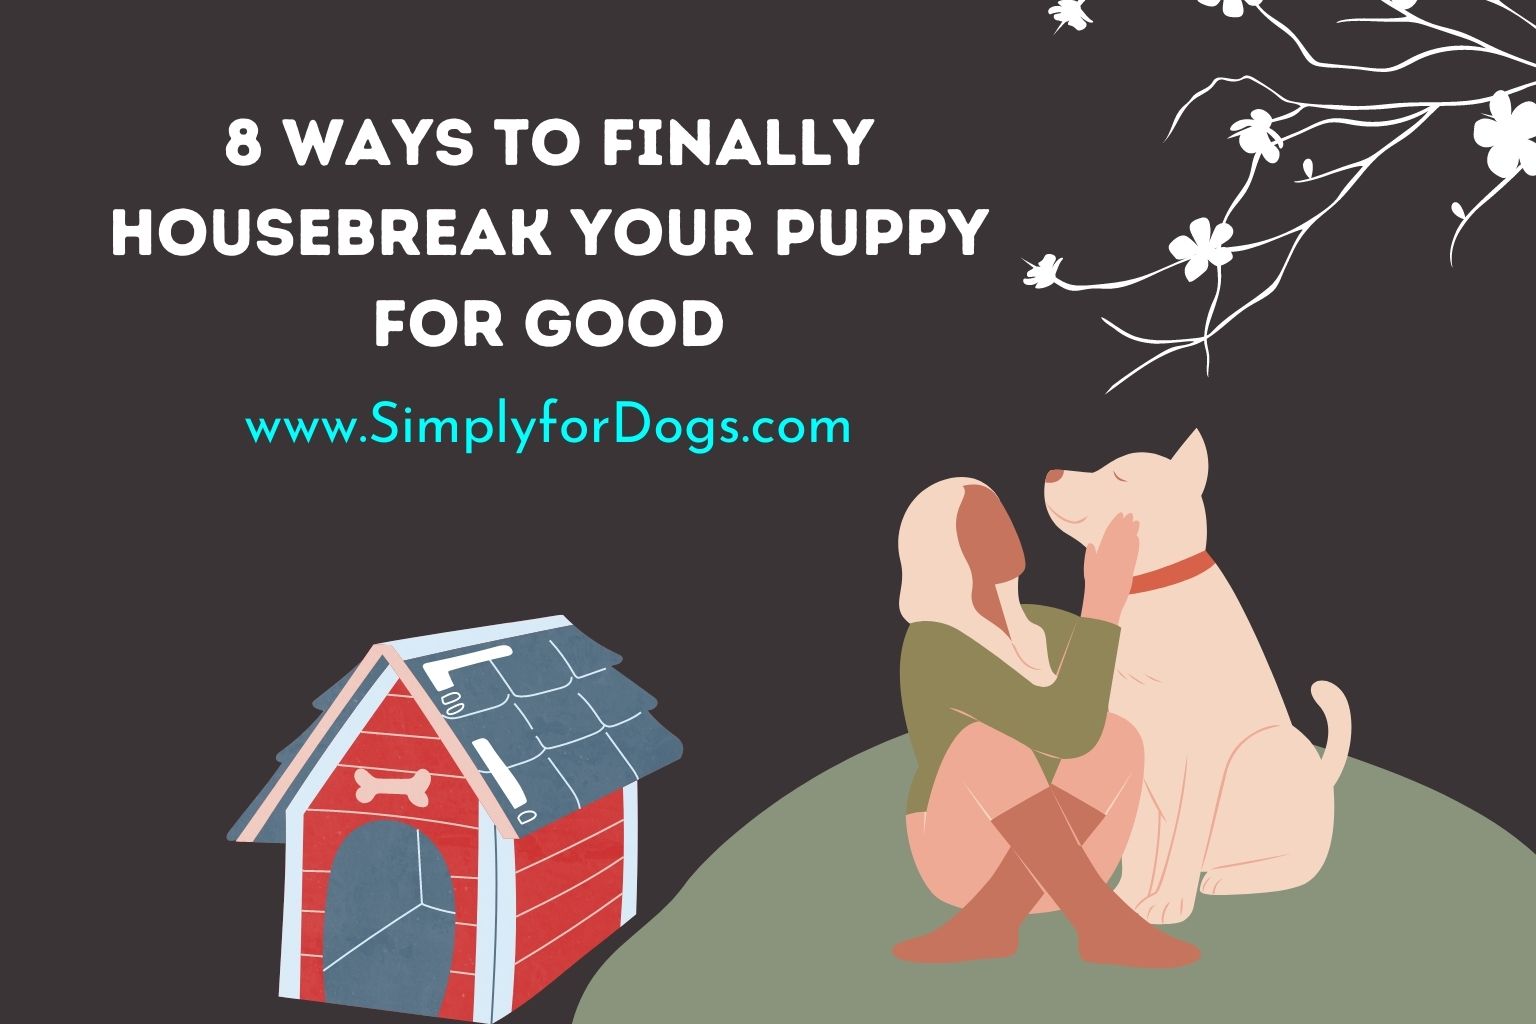 8 Ways to Finally Housebreak Your Puppy For Good